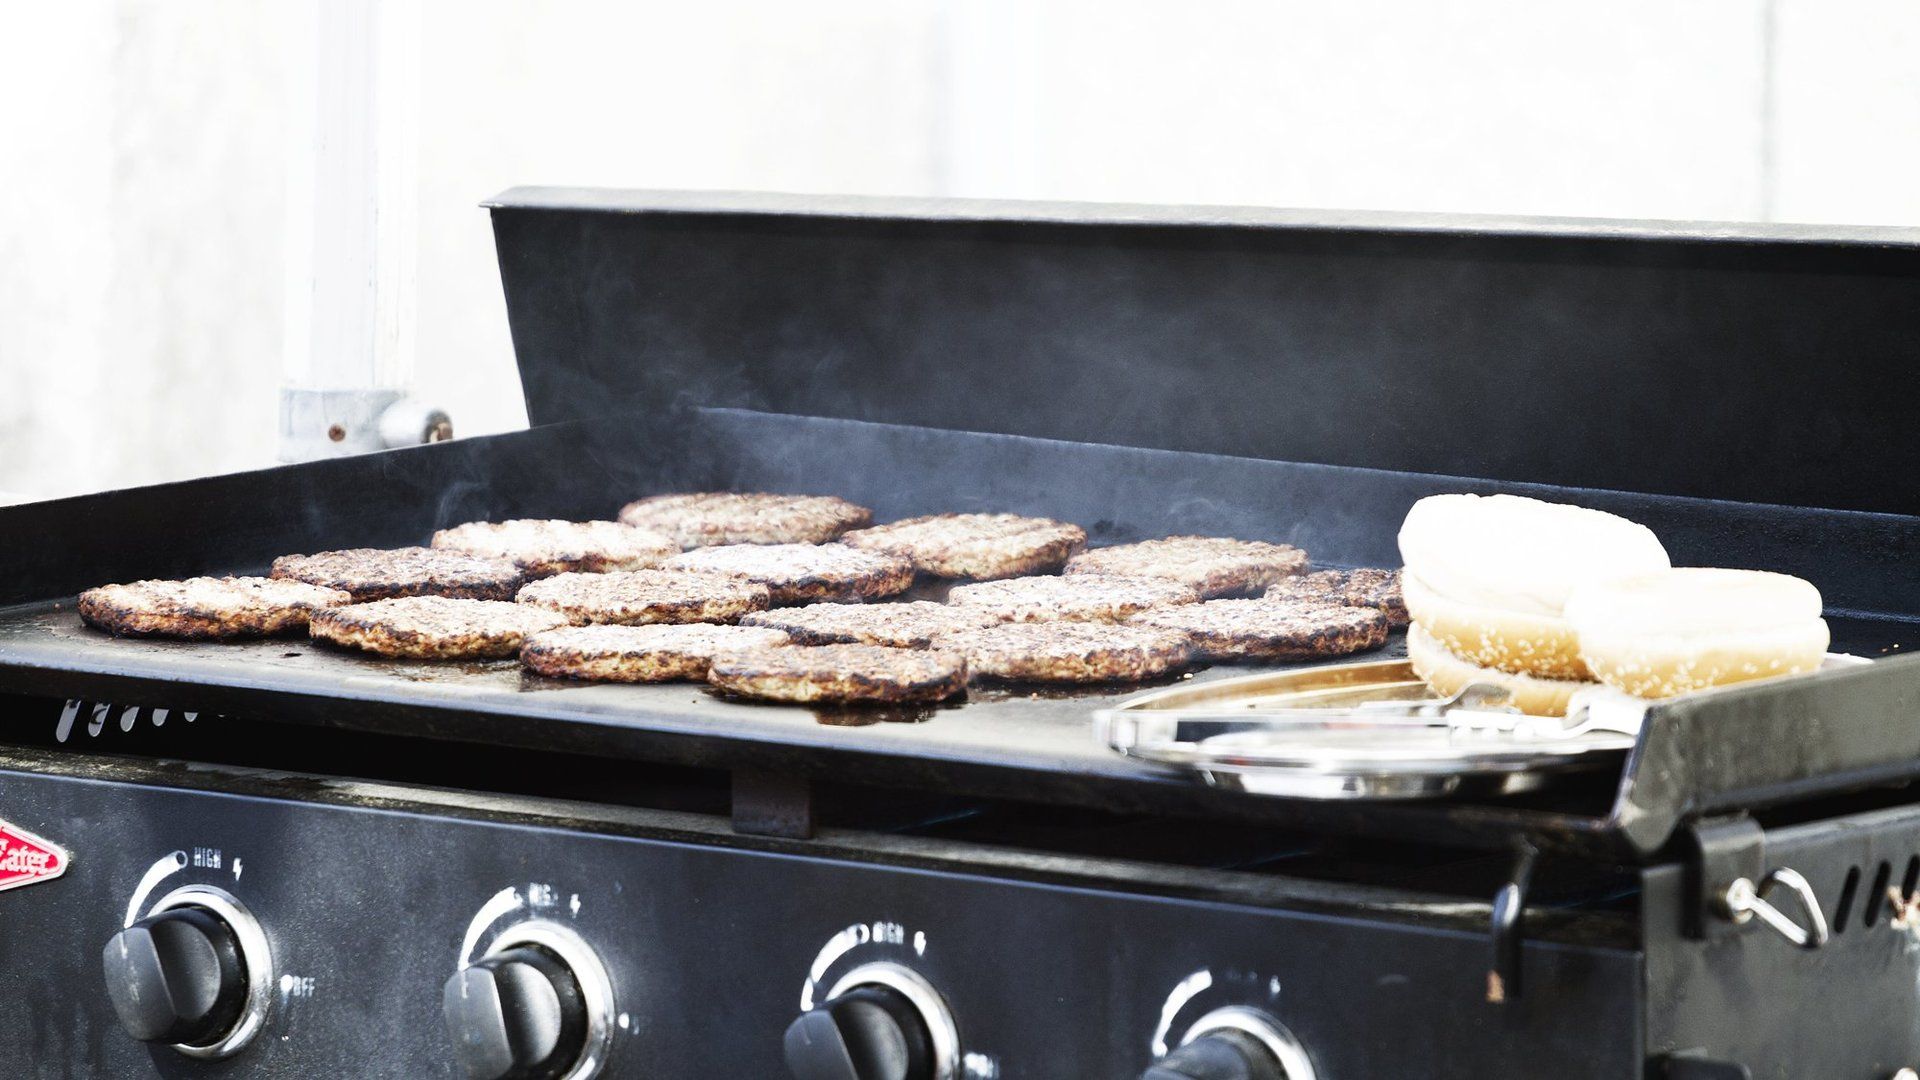 A bunch of hamburgers are cooking on a grill